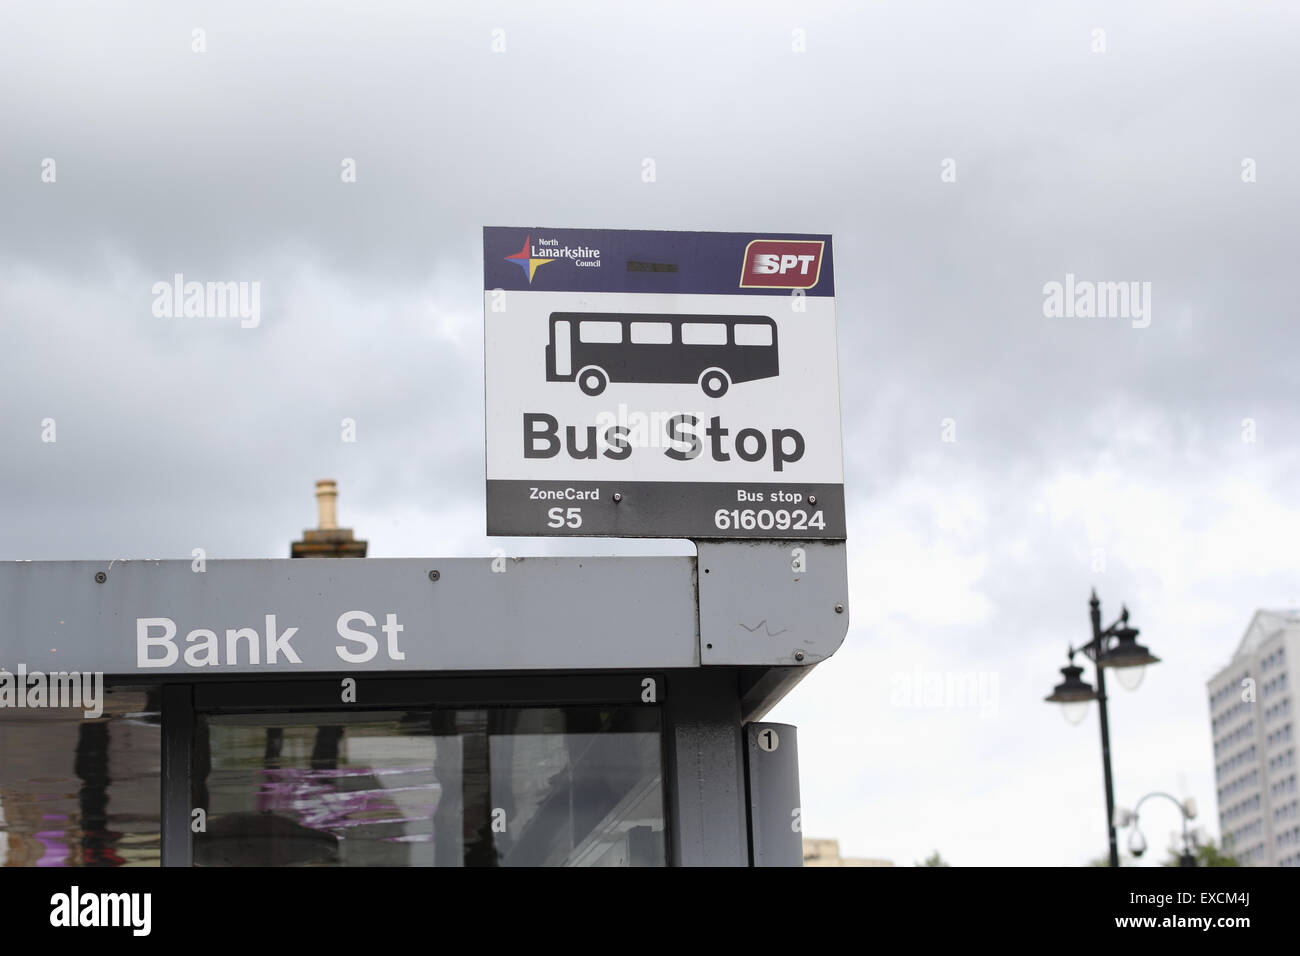 Bus stop sign in Airdrie, North Lanarkshire, Scotland, United Kingdom Stock Photo